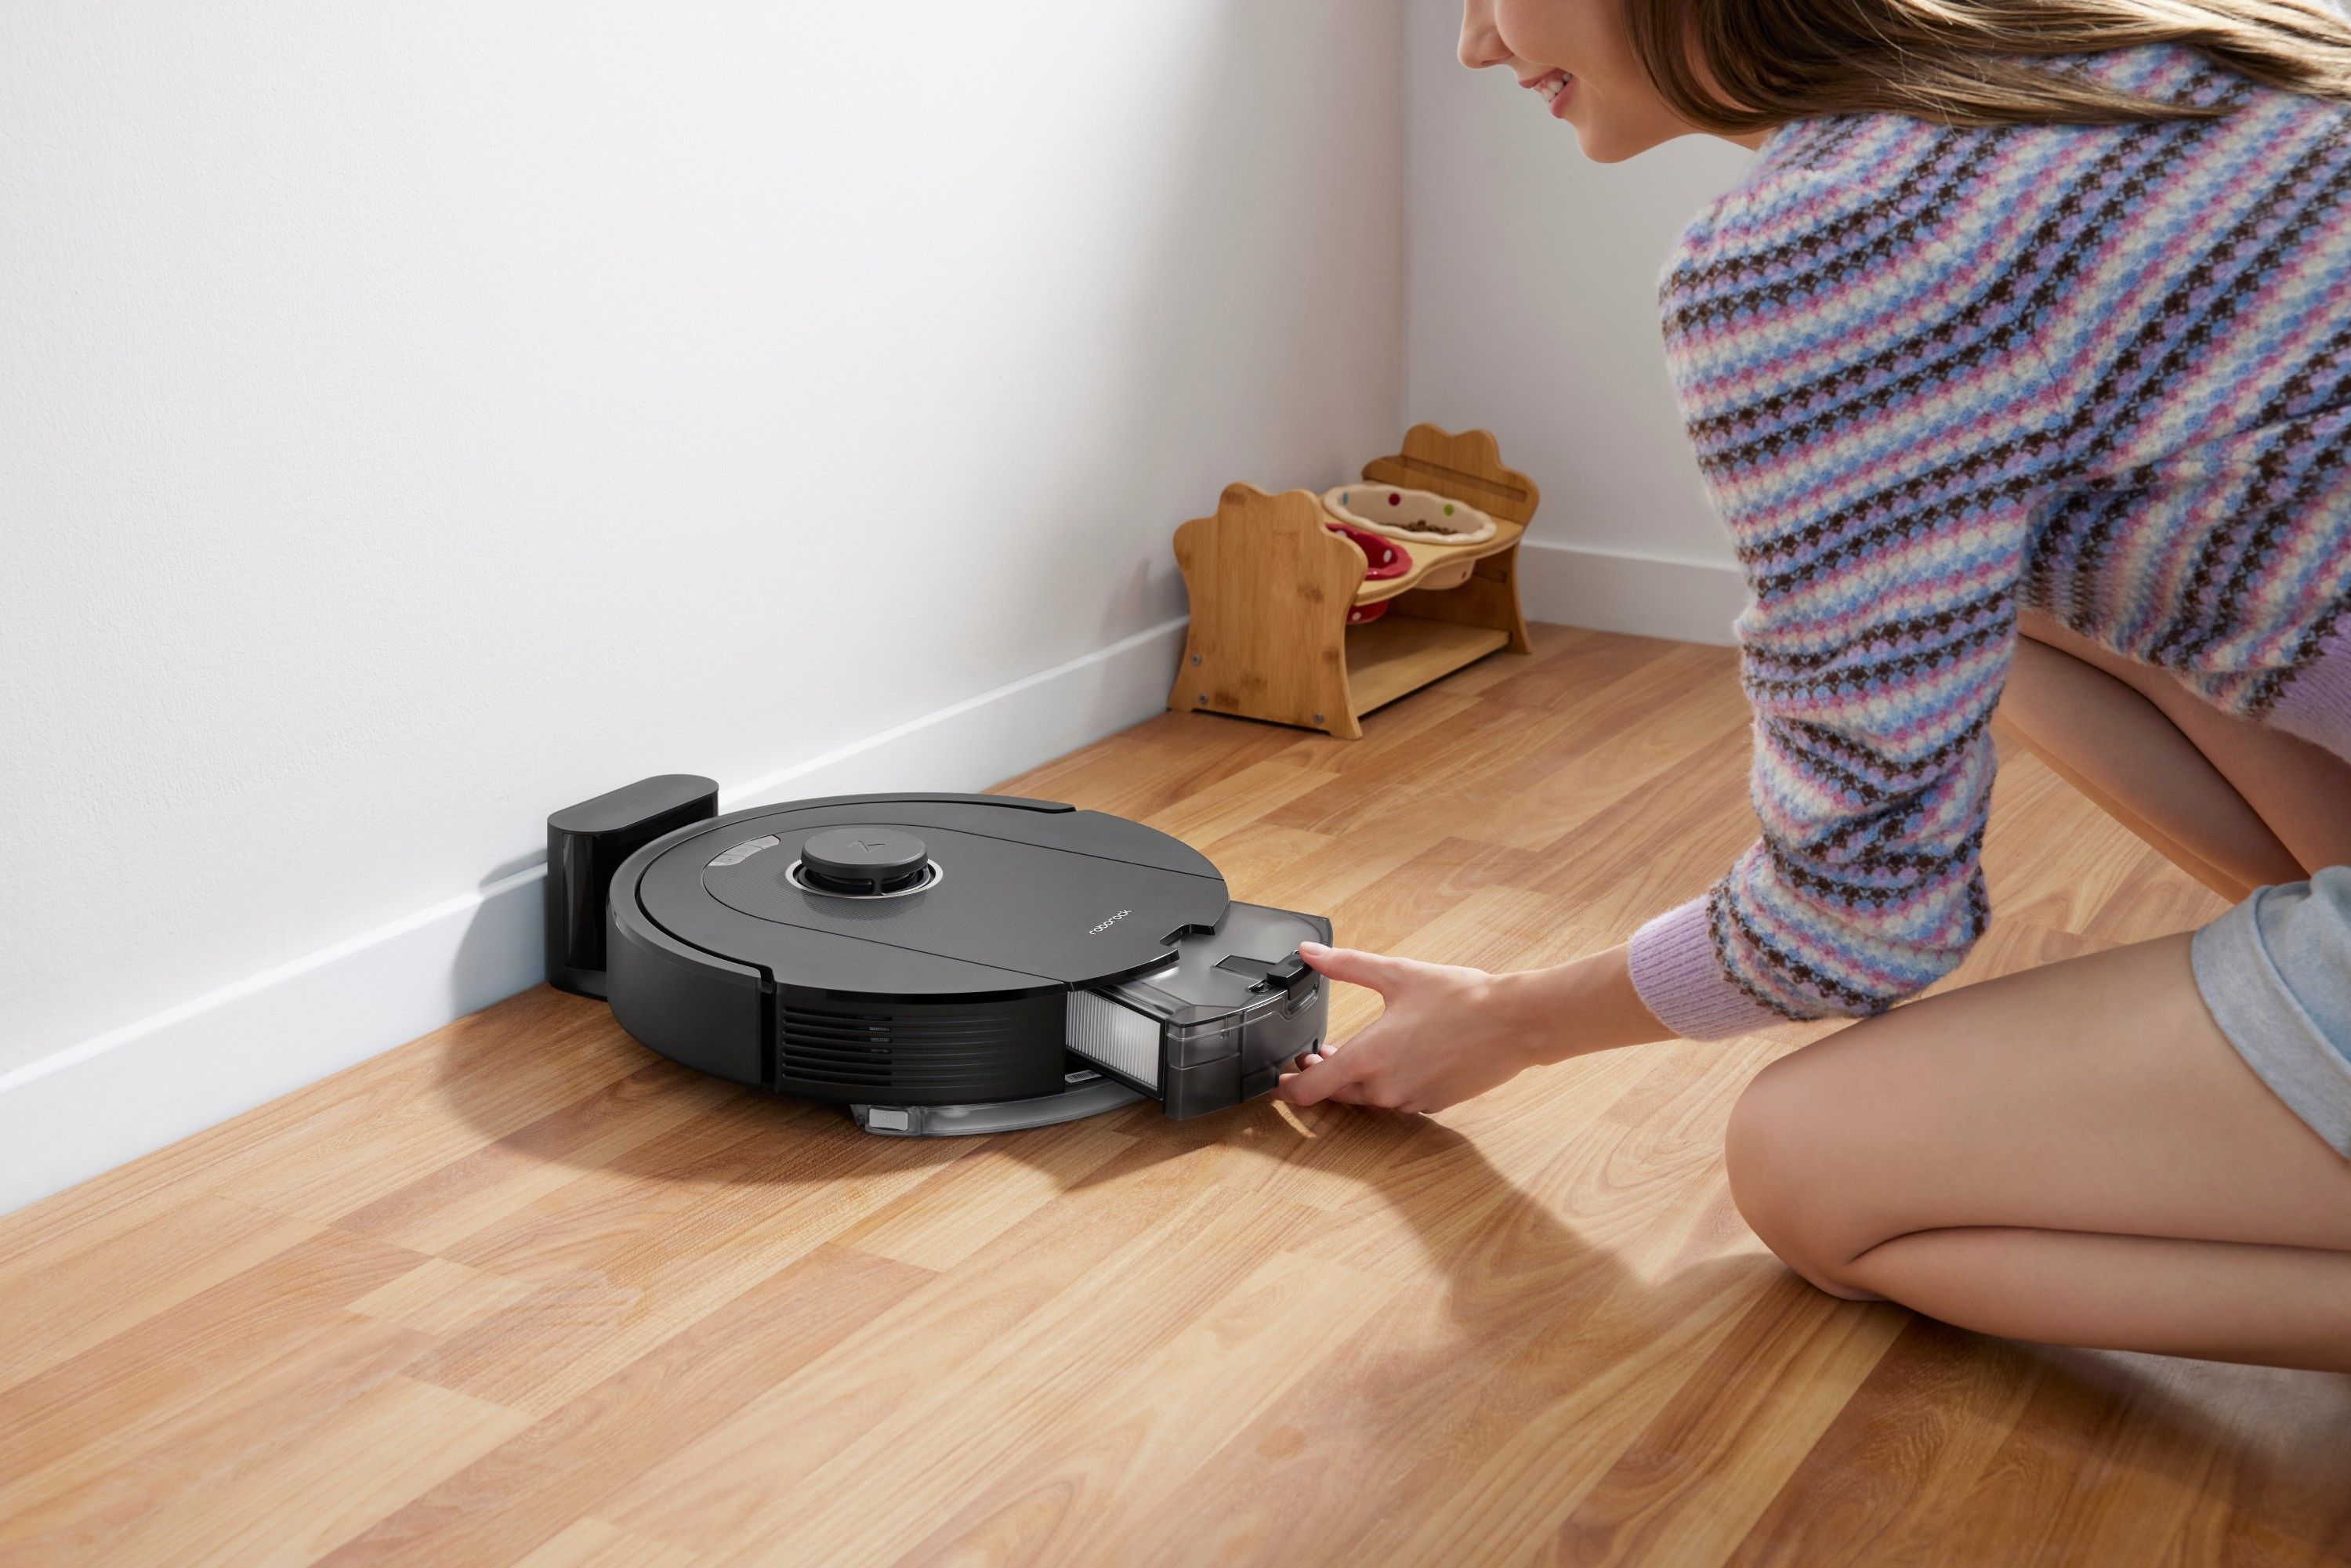 Roborock adds the Q5 Pro and Q8 Max to its wide range of robot